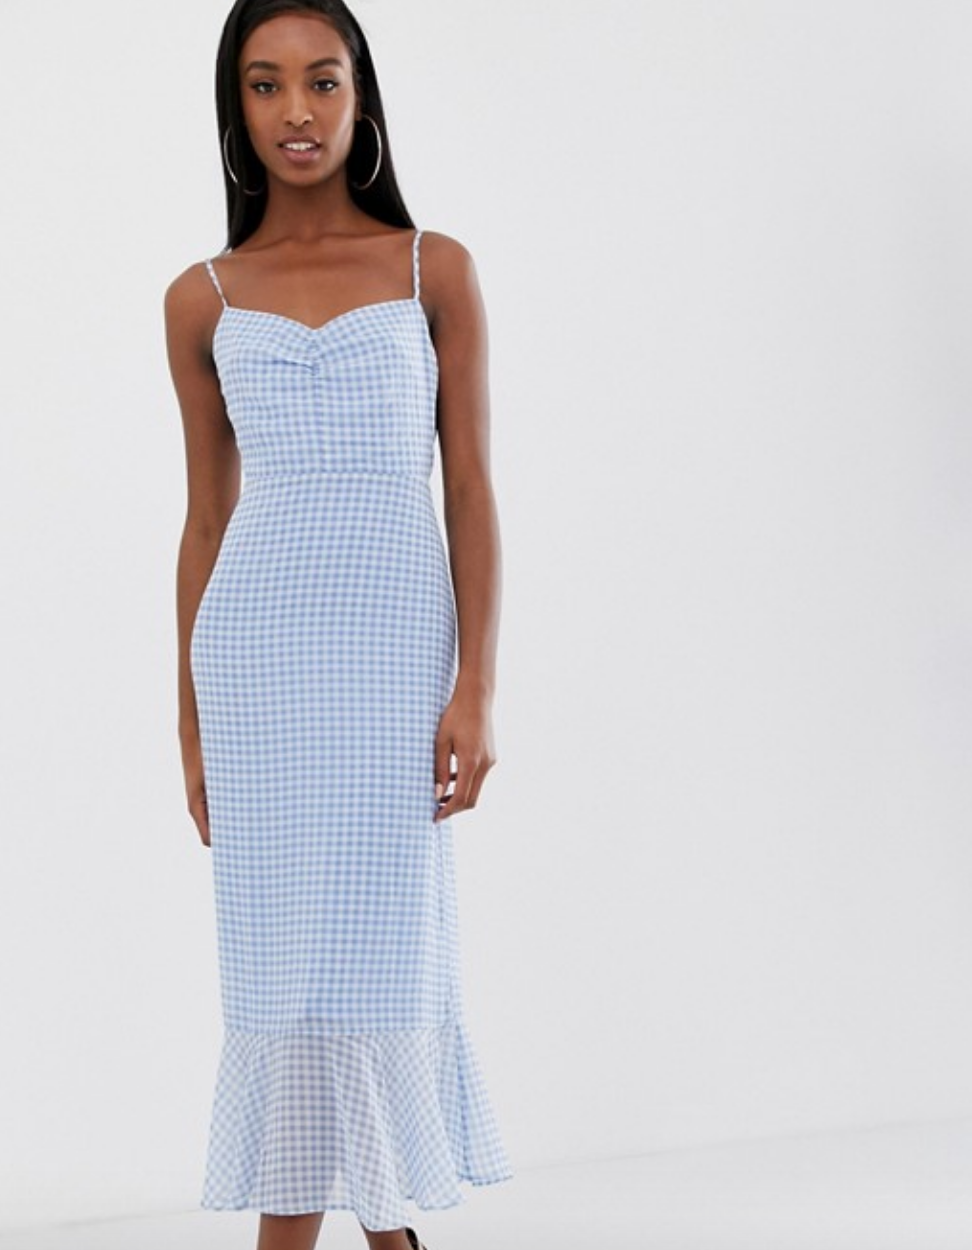 It's The Season of Gingham, These Are The Pieces You Need